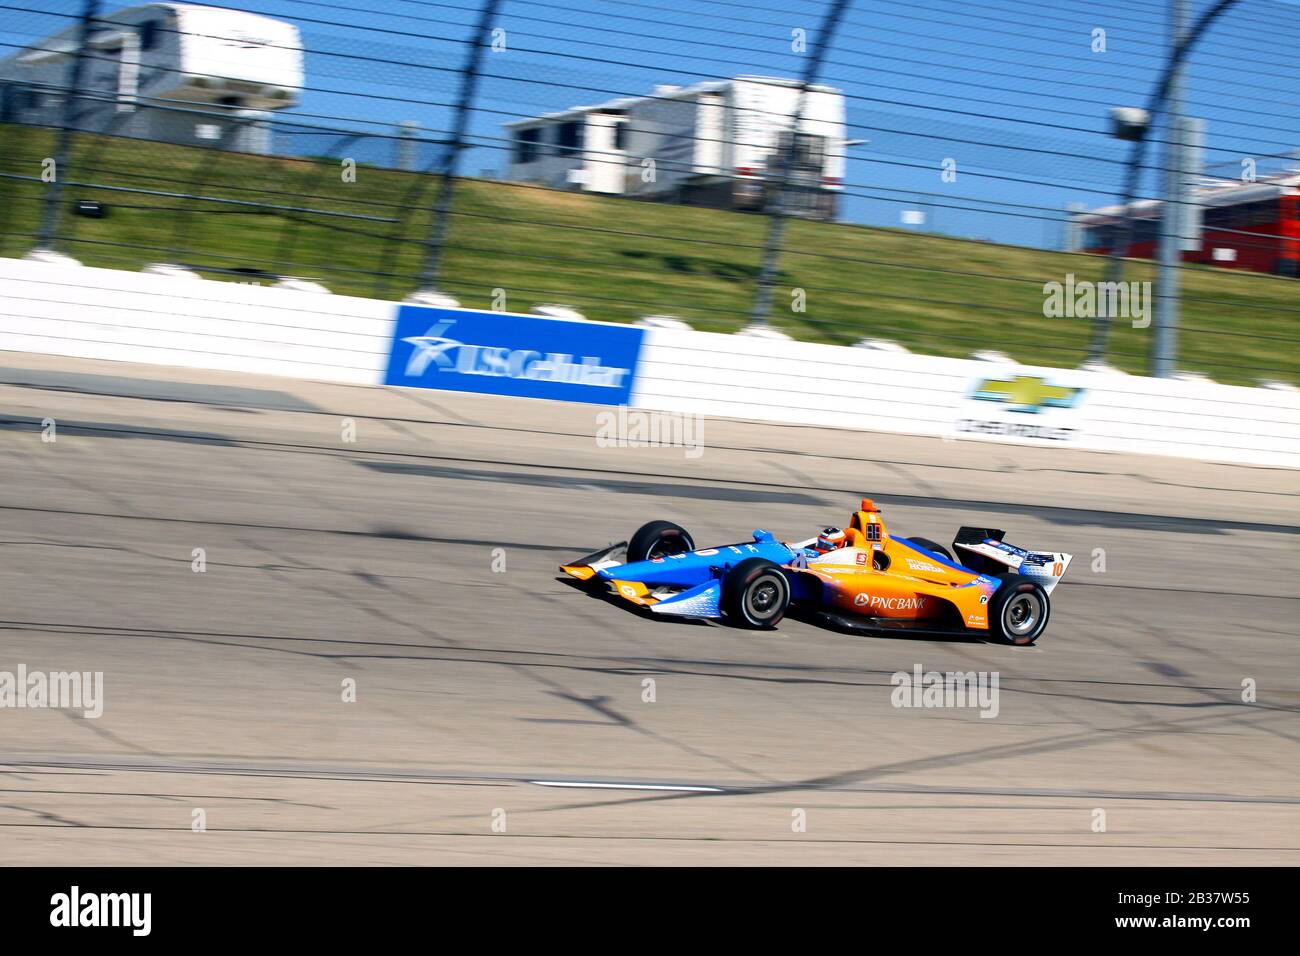 Newton Iowa, July 19, 2019:  Felix Rosenqvist, Sweden, on race track during practice session for the Iowa 300 Indycar race. Stock Photo